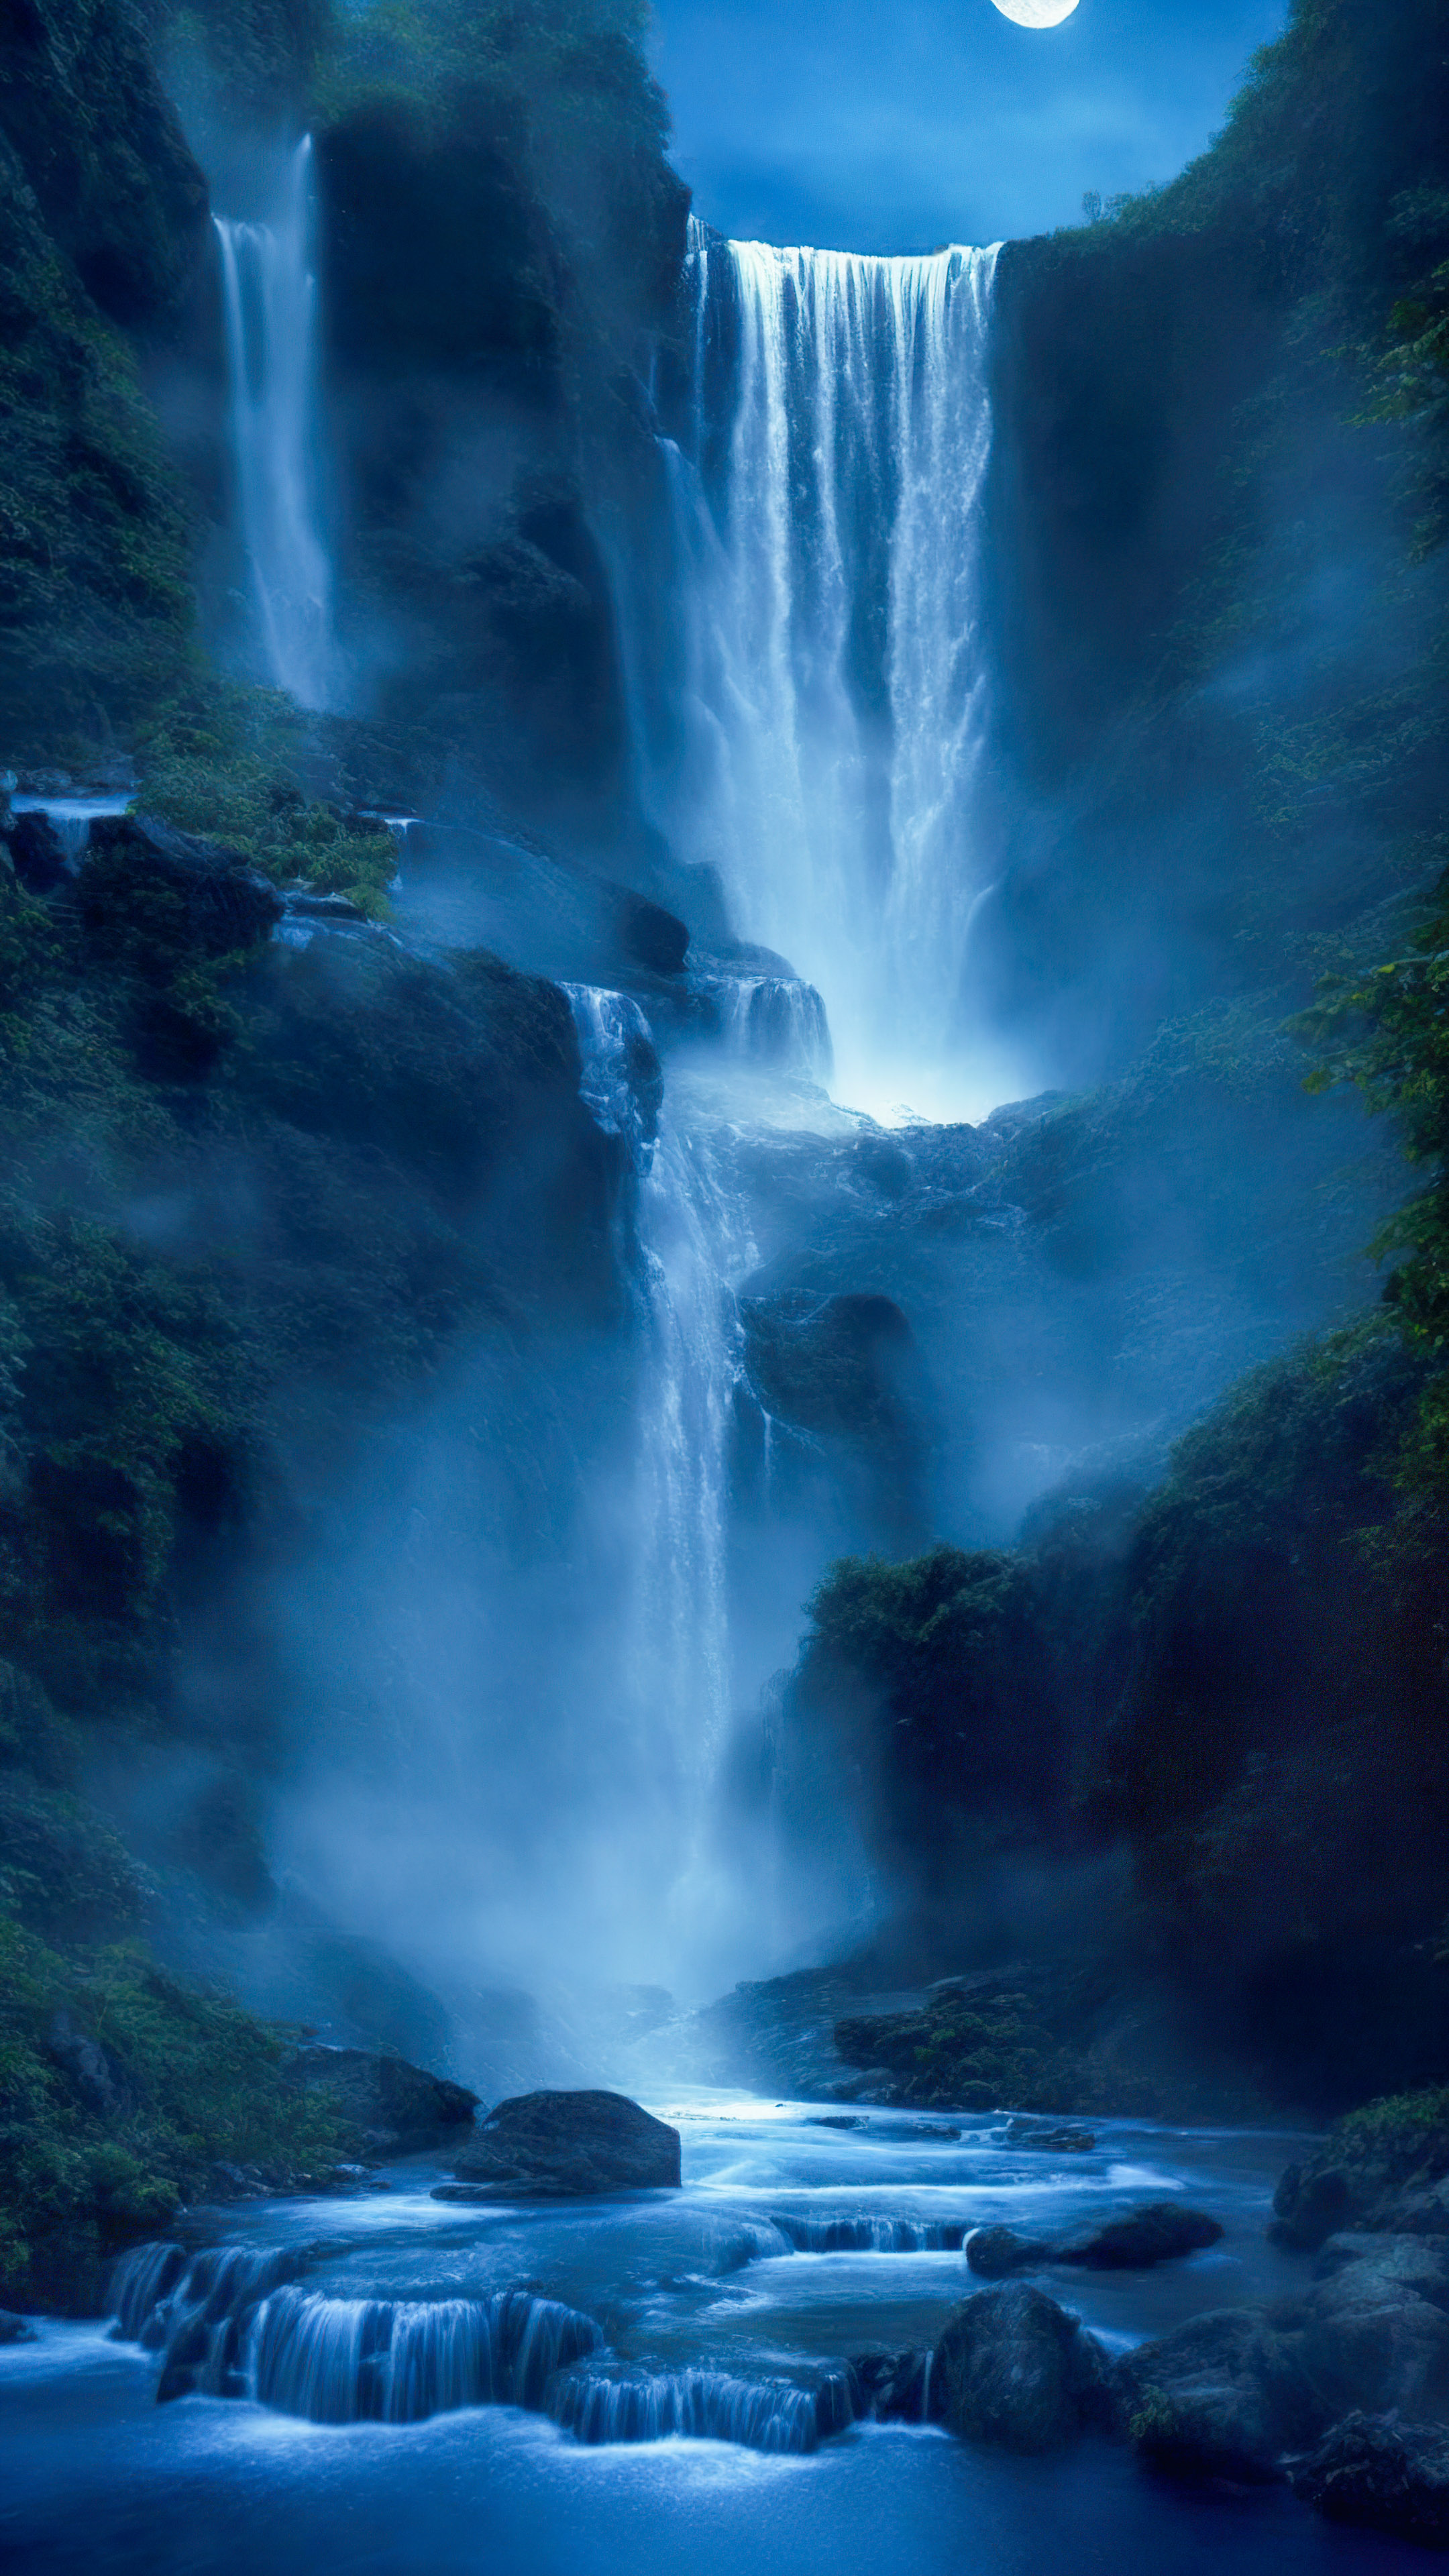 Adorn your iPhone with our landscape wallpaper in 4K, featuring a magical waterfall illuminated by moonlight, with fireflies dancing around its cascading waters.